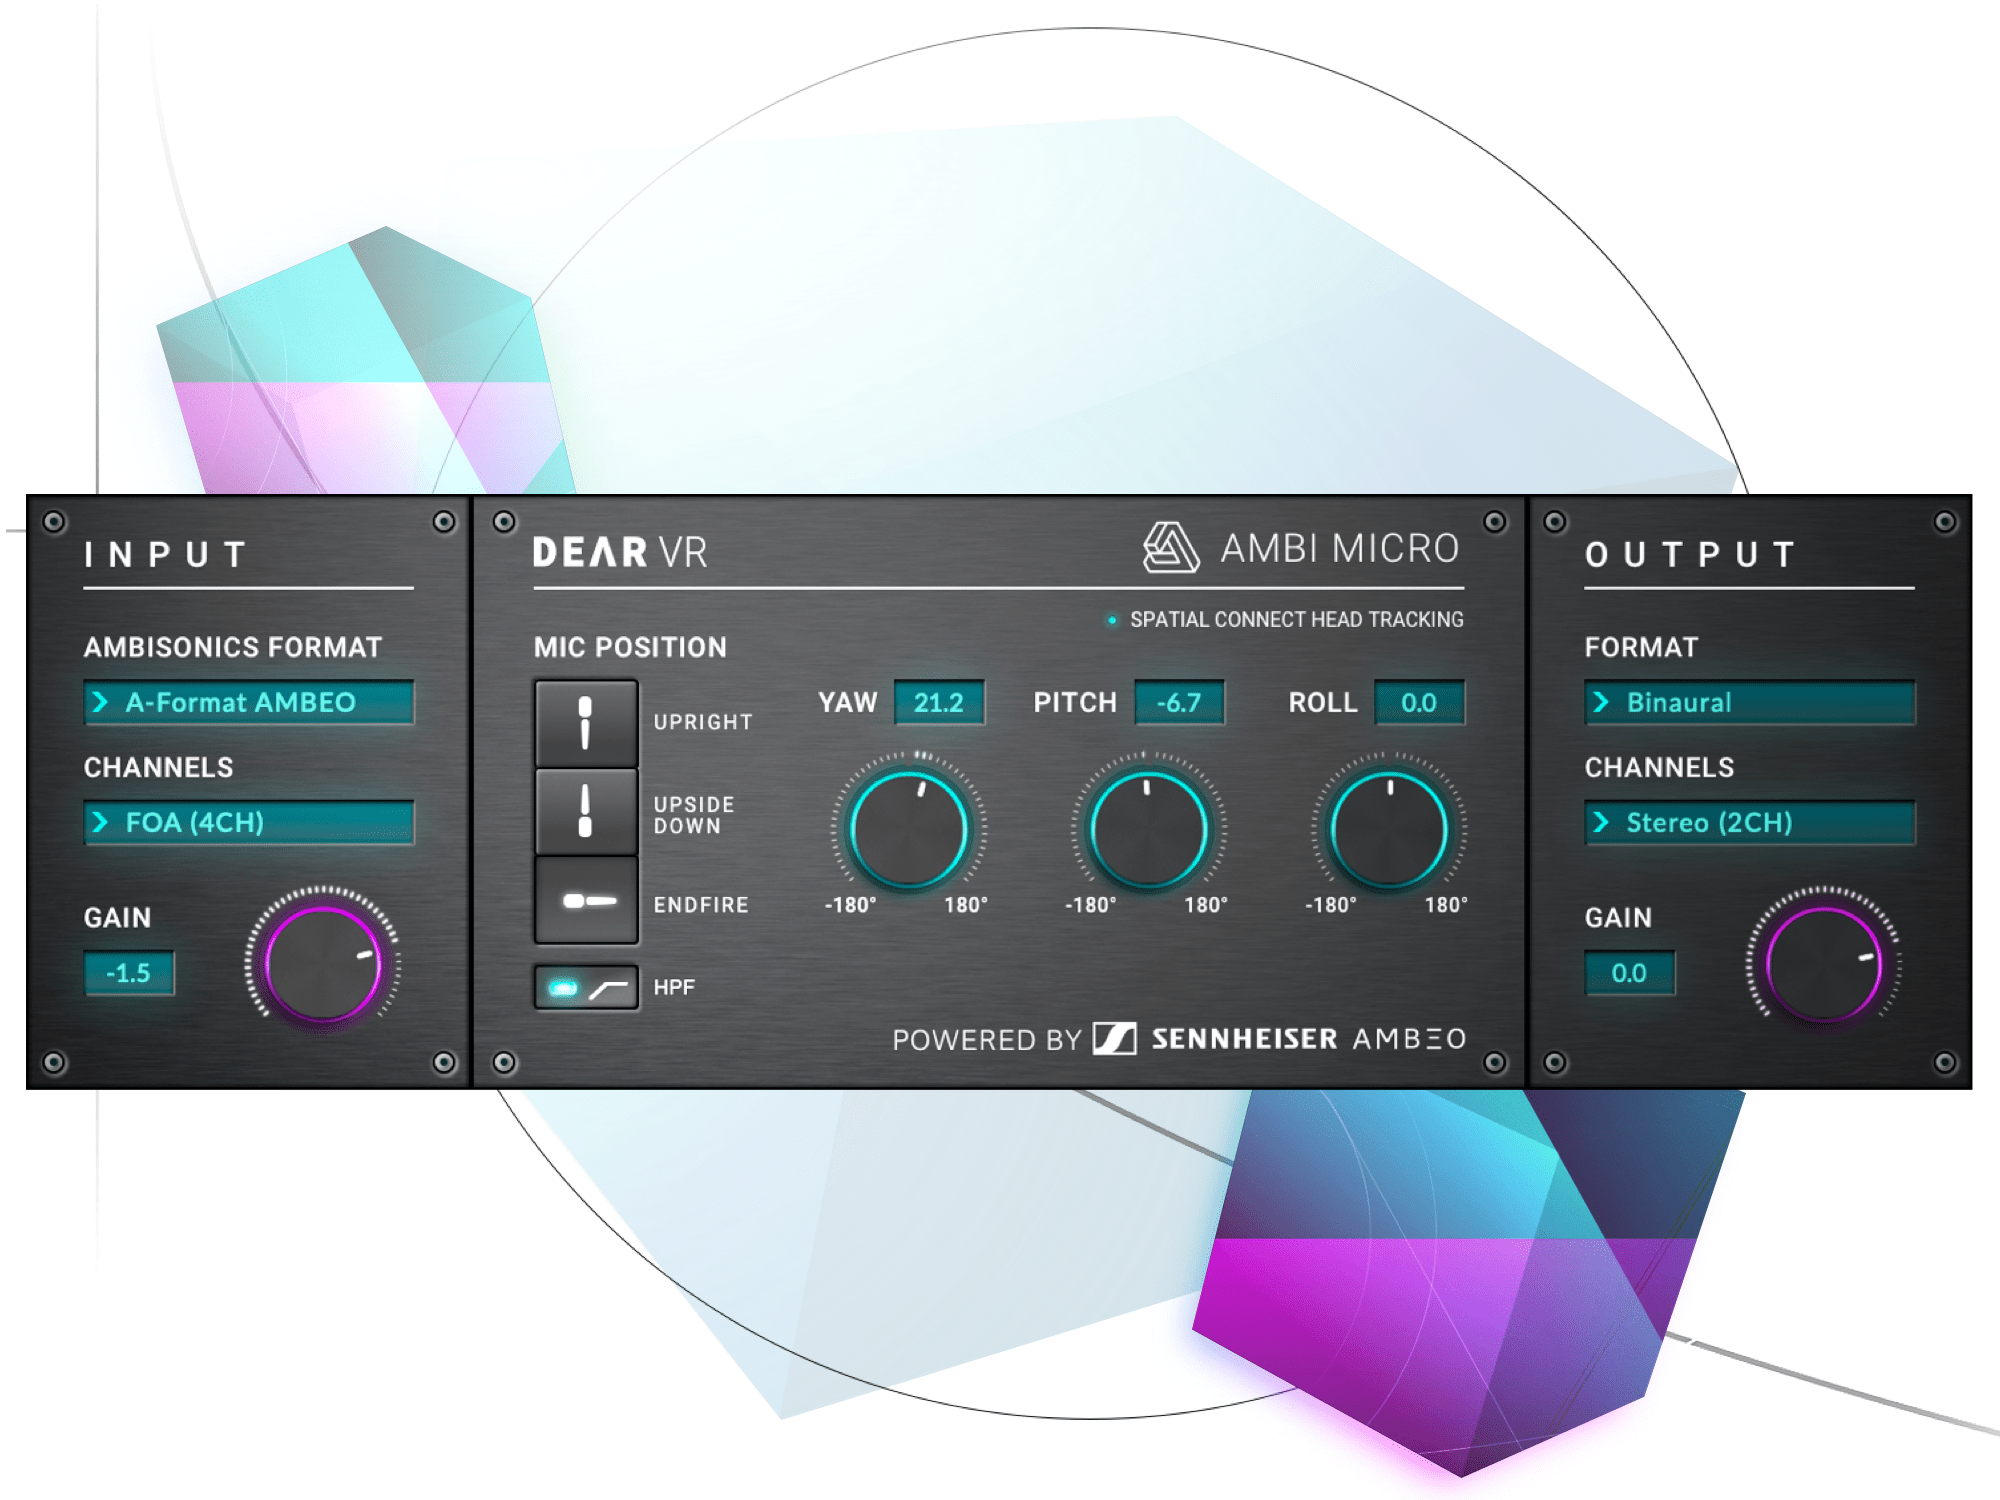 dearVR AMBI MICRO user interface showing advanced control functionalities for the Sennheiser AMBEO VR mic